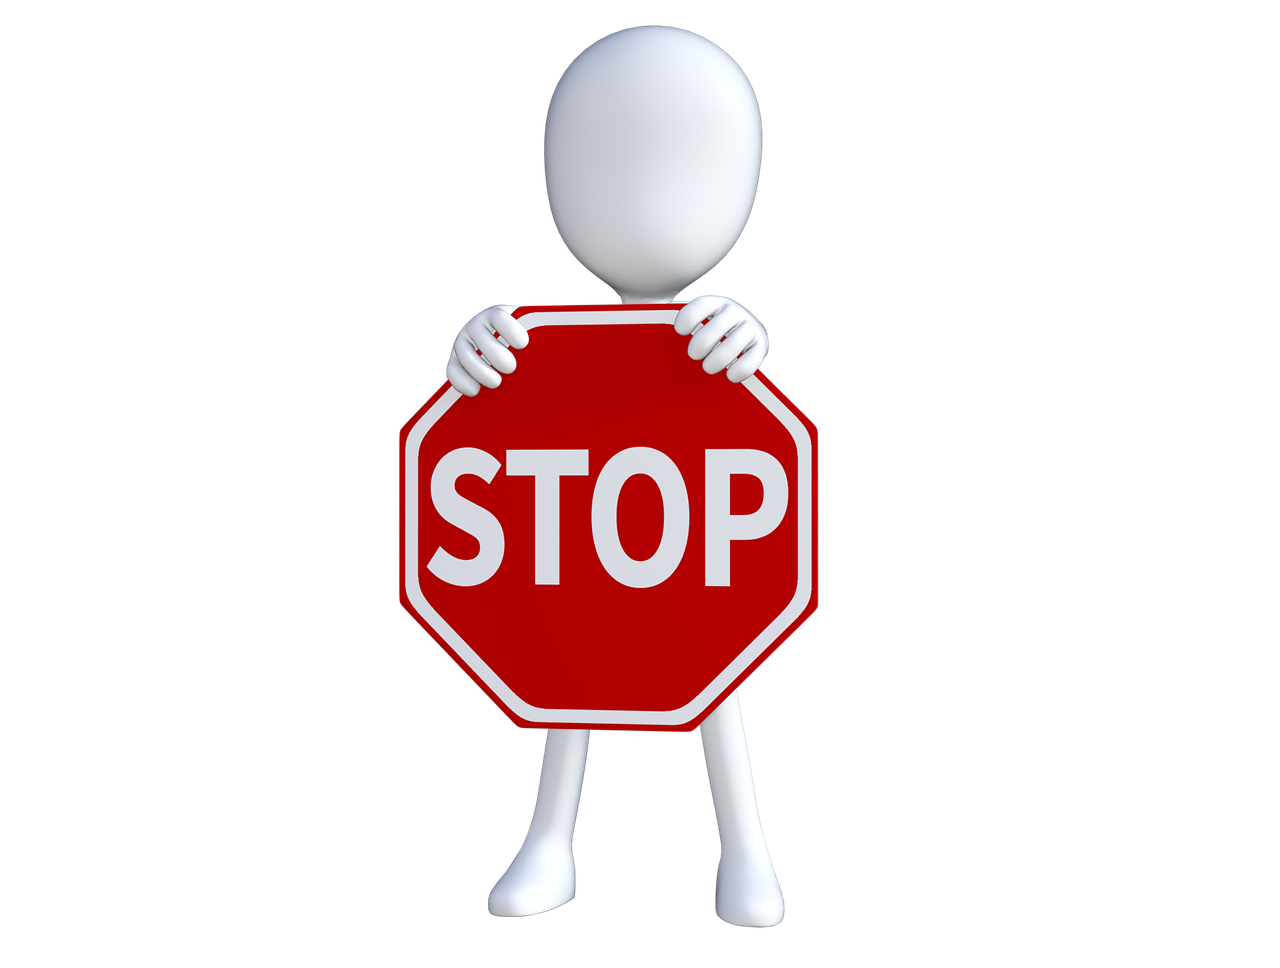 3D character figure holding stop sign